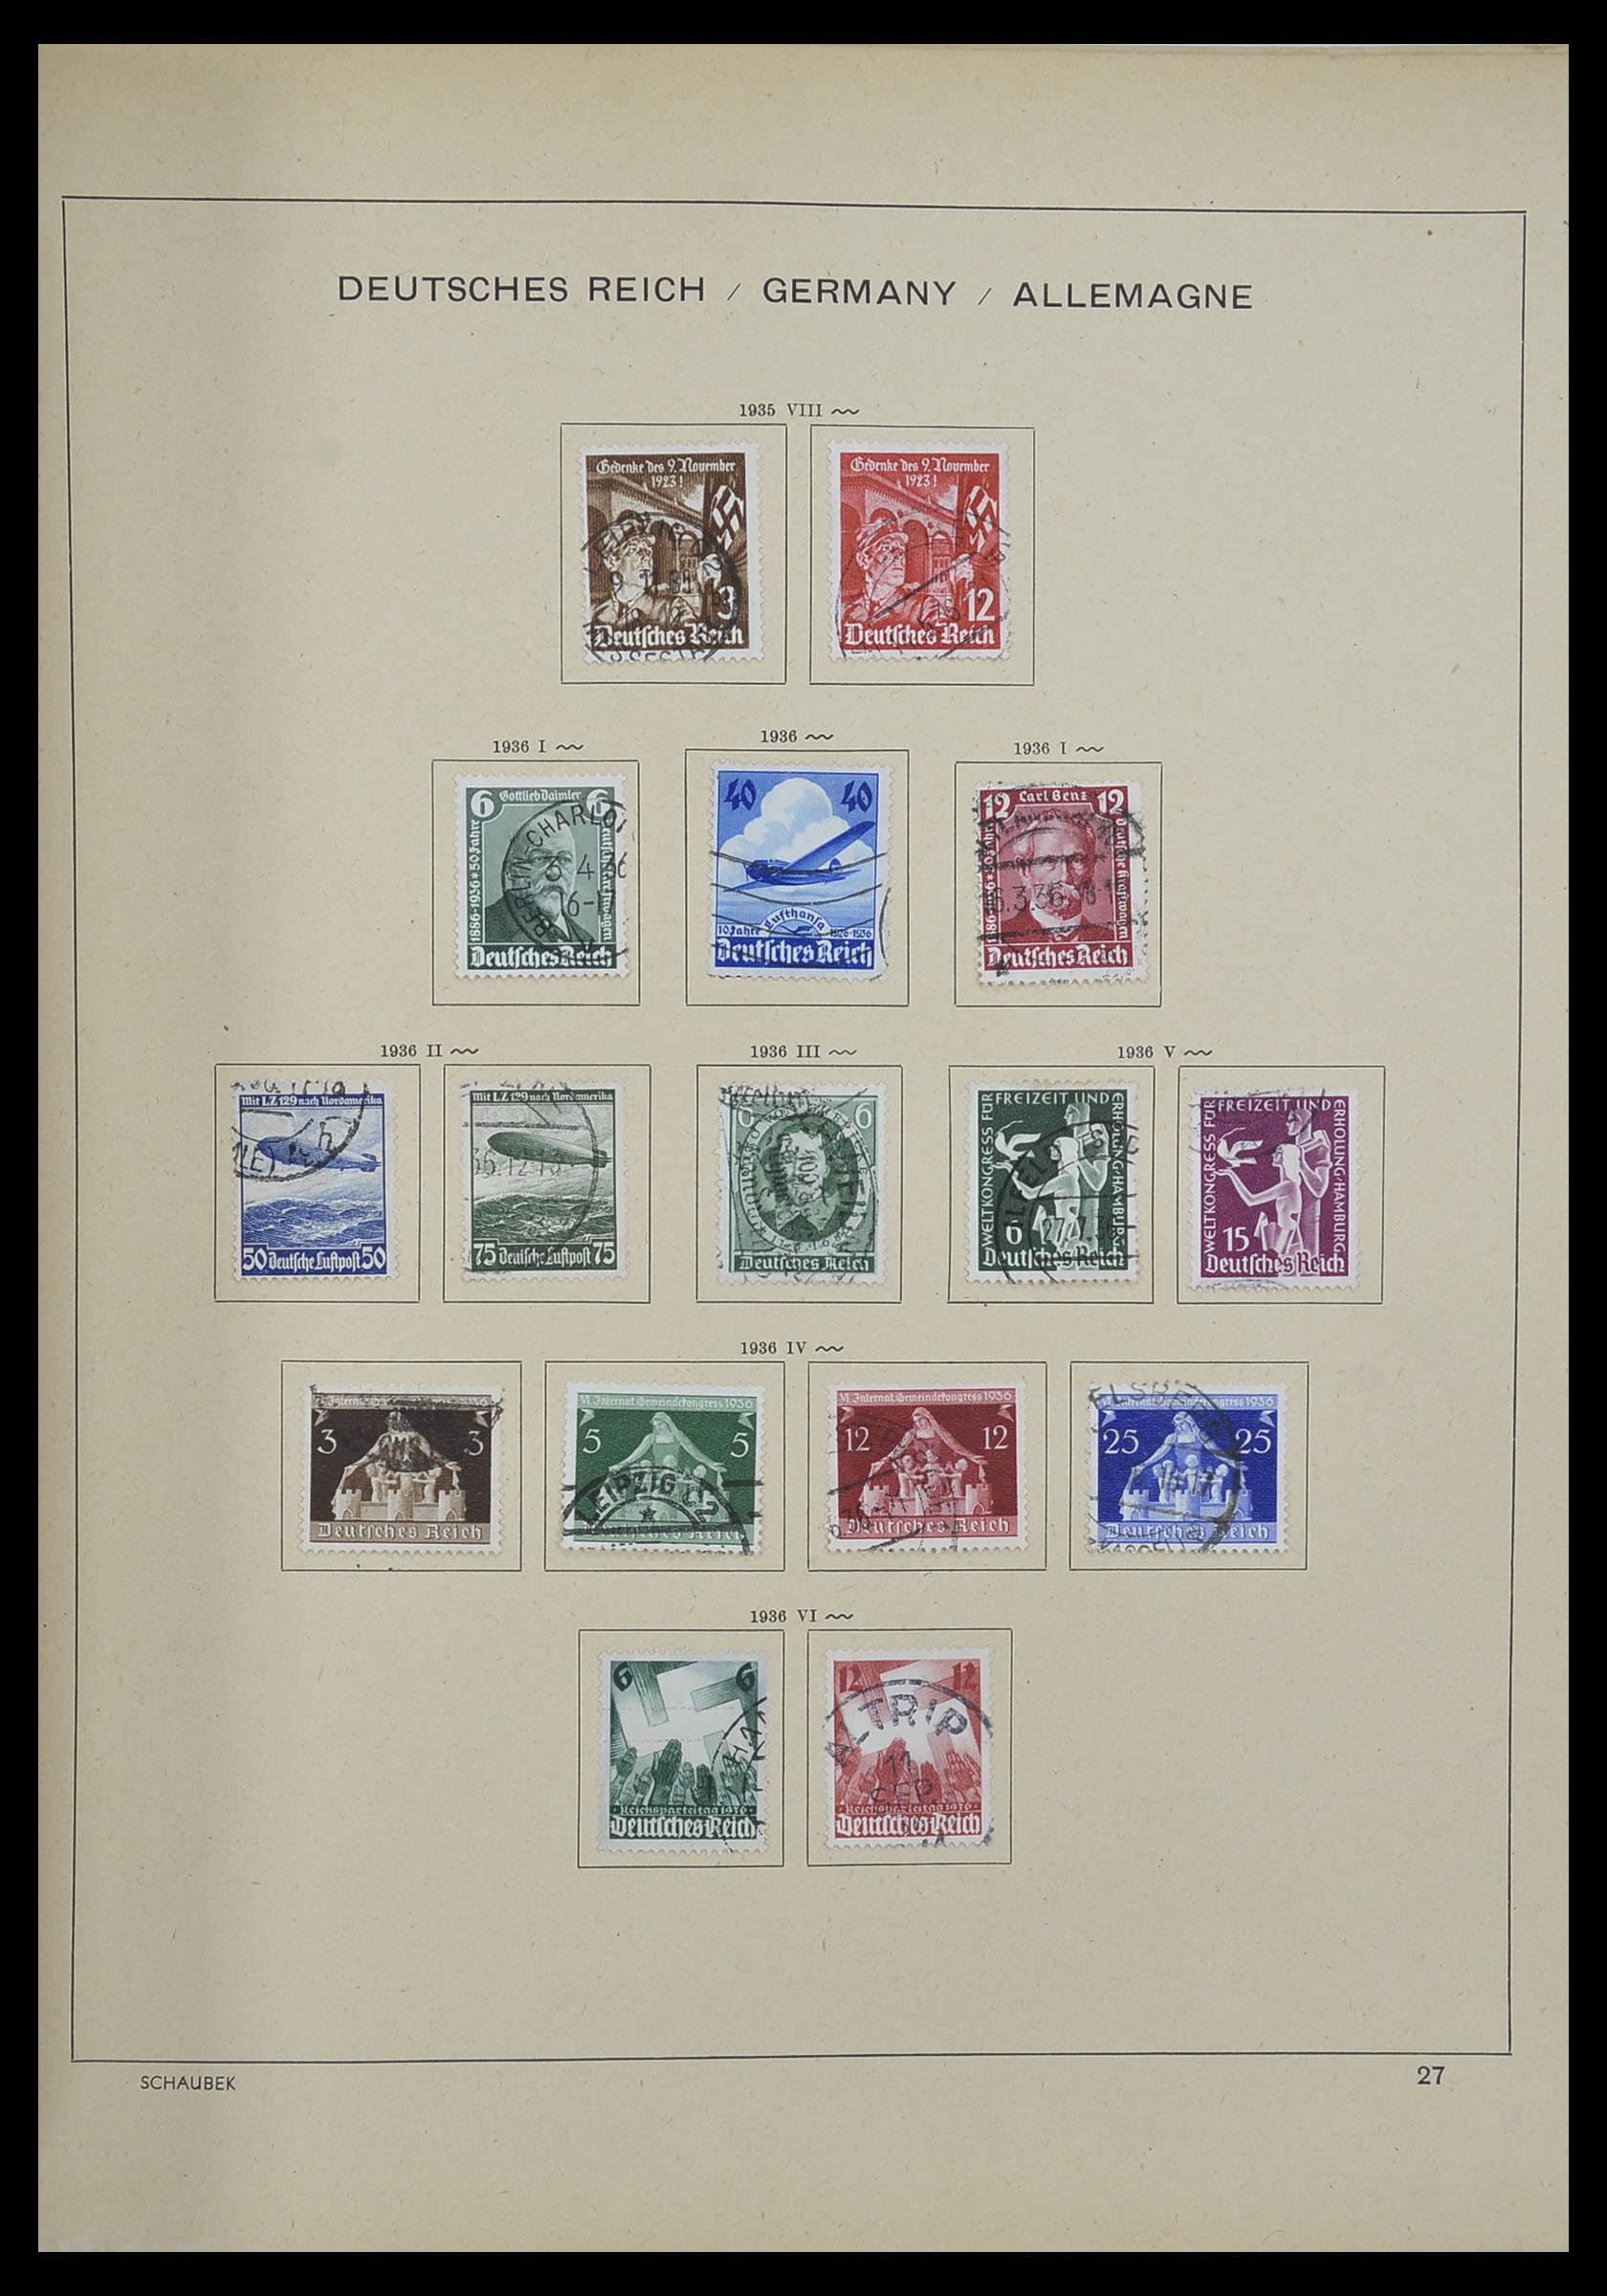 33192 051 - Stamp collection 33192 Germany 1850-1984.